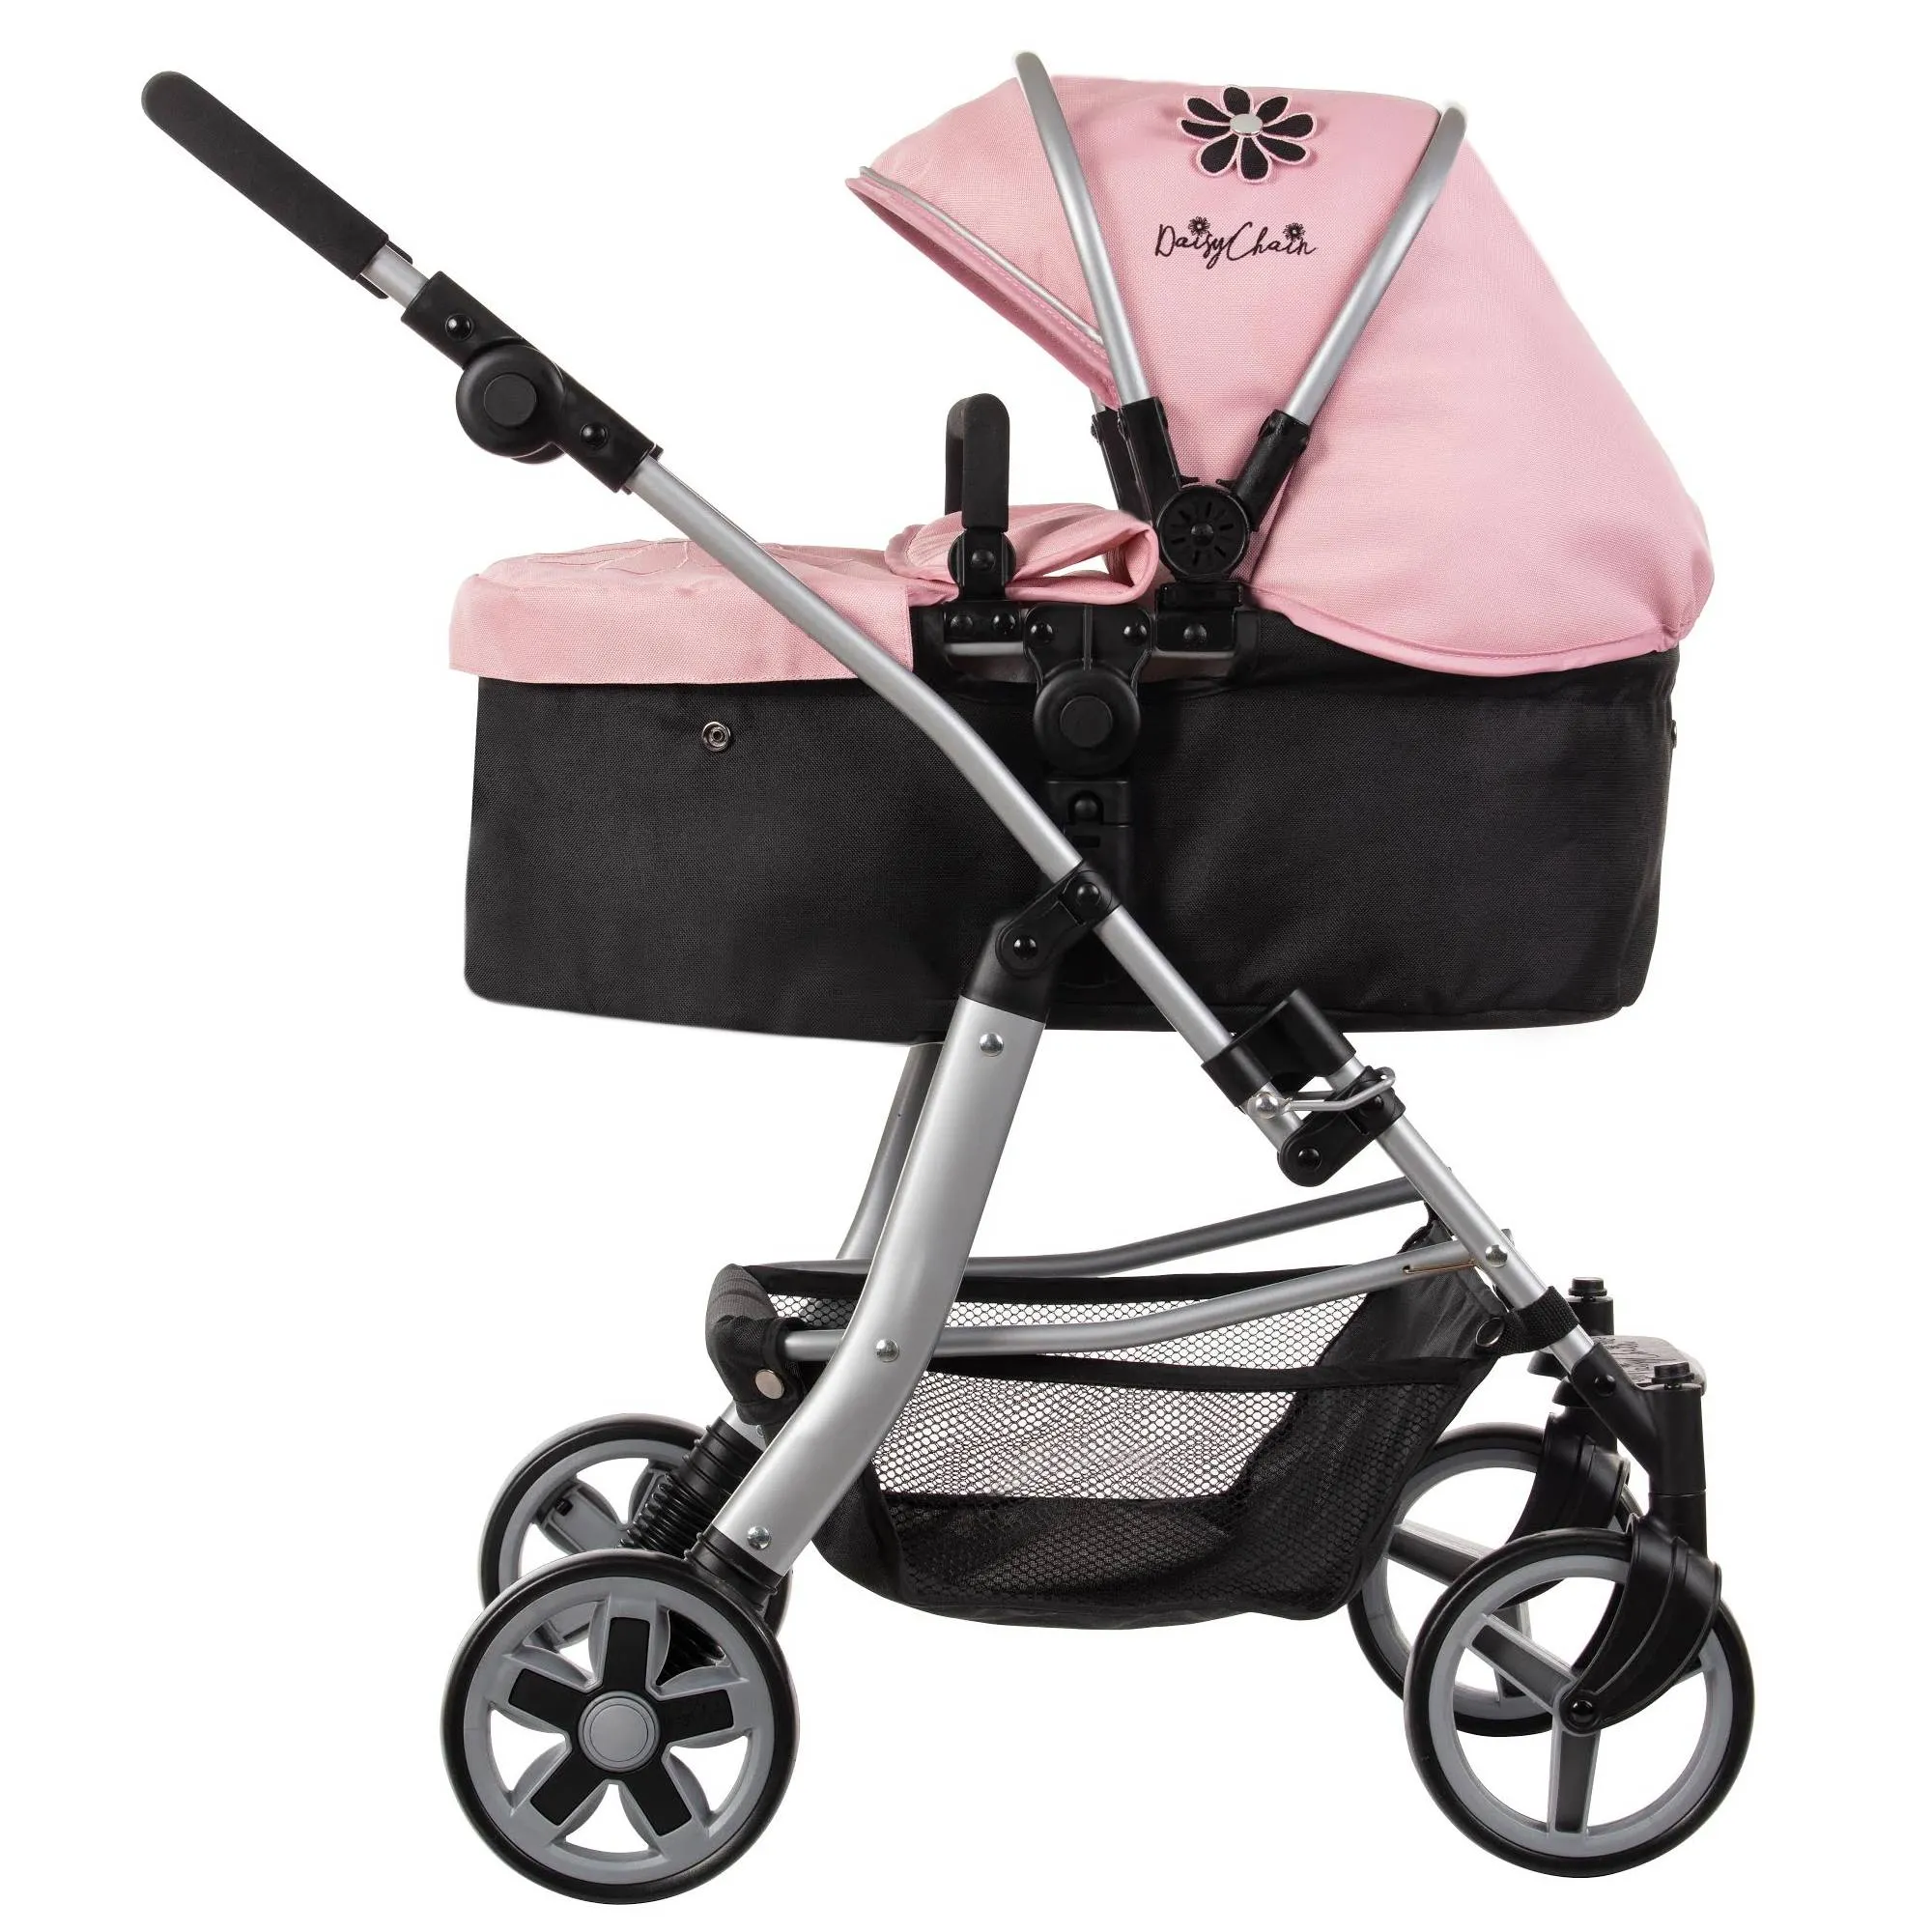 Buy The Daisy Chain Connect 5 in 1 Dolls Pram in Classic Pink